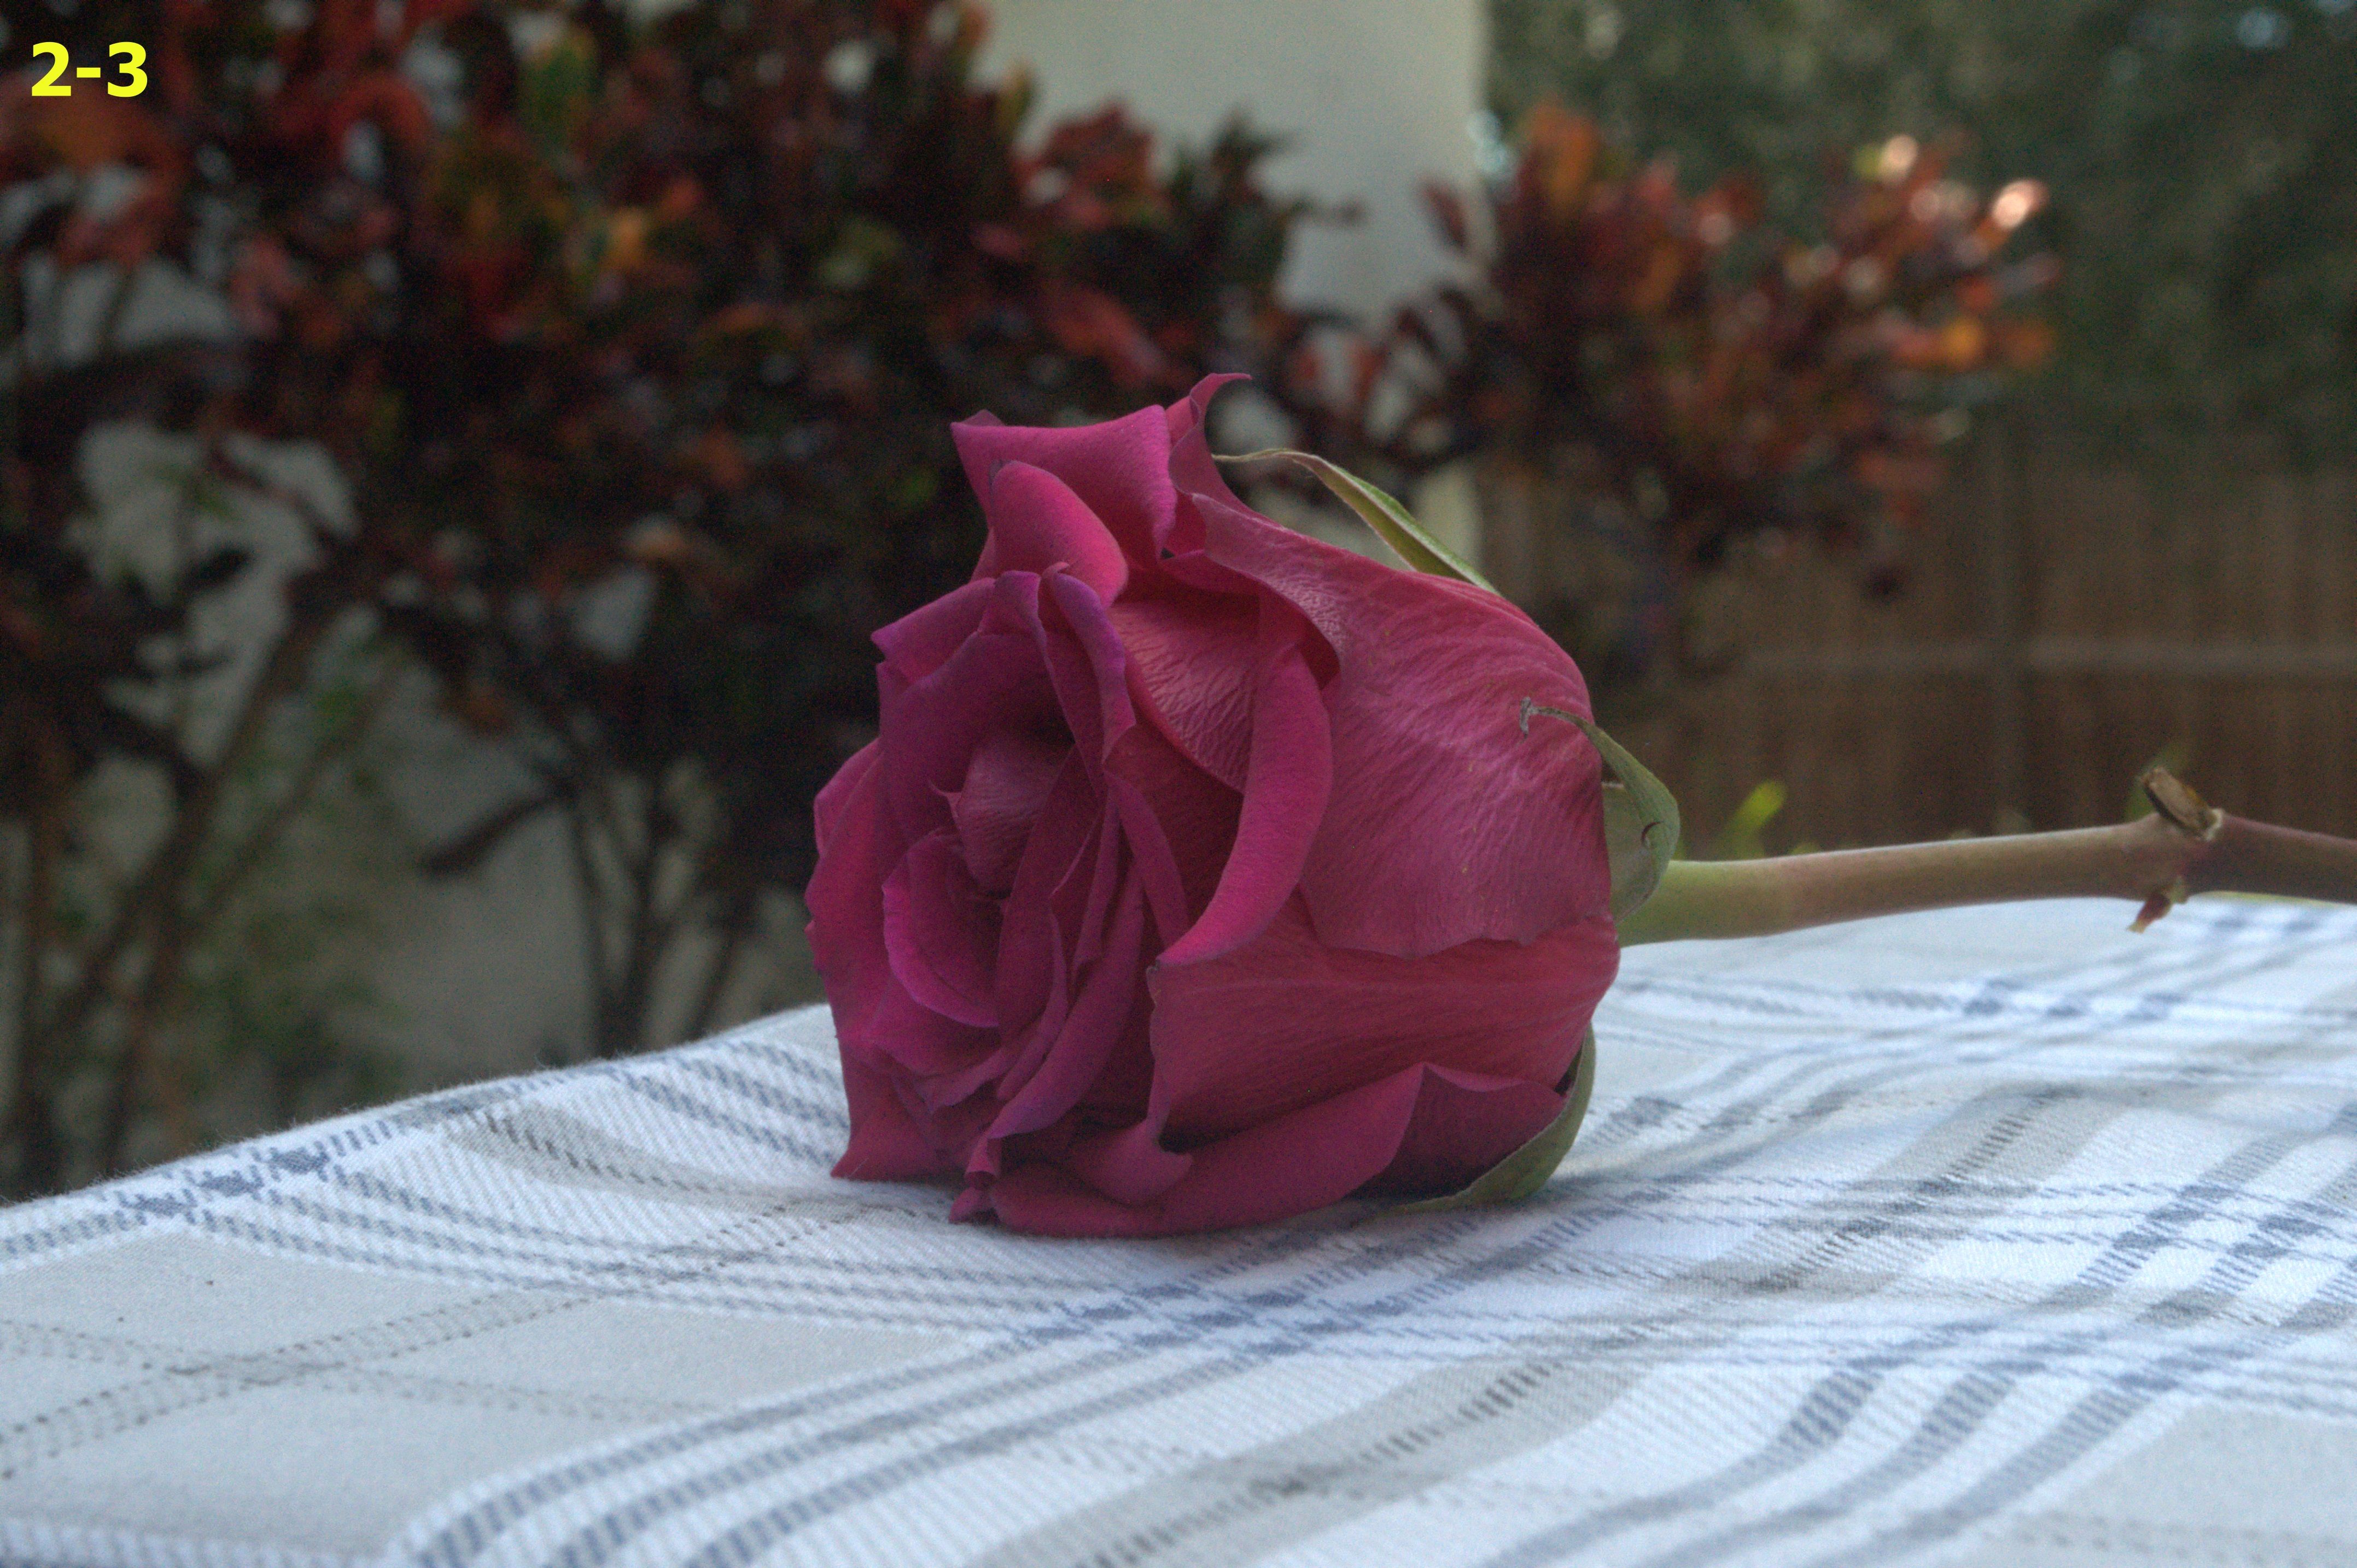 Red rose on table